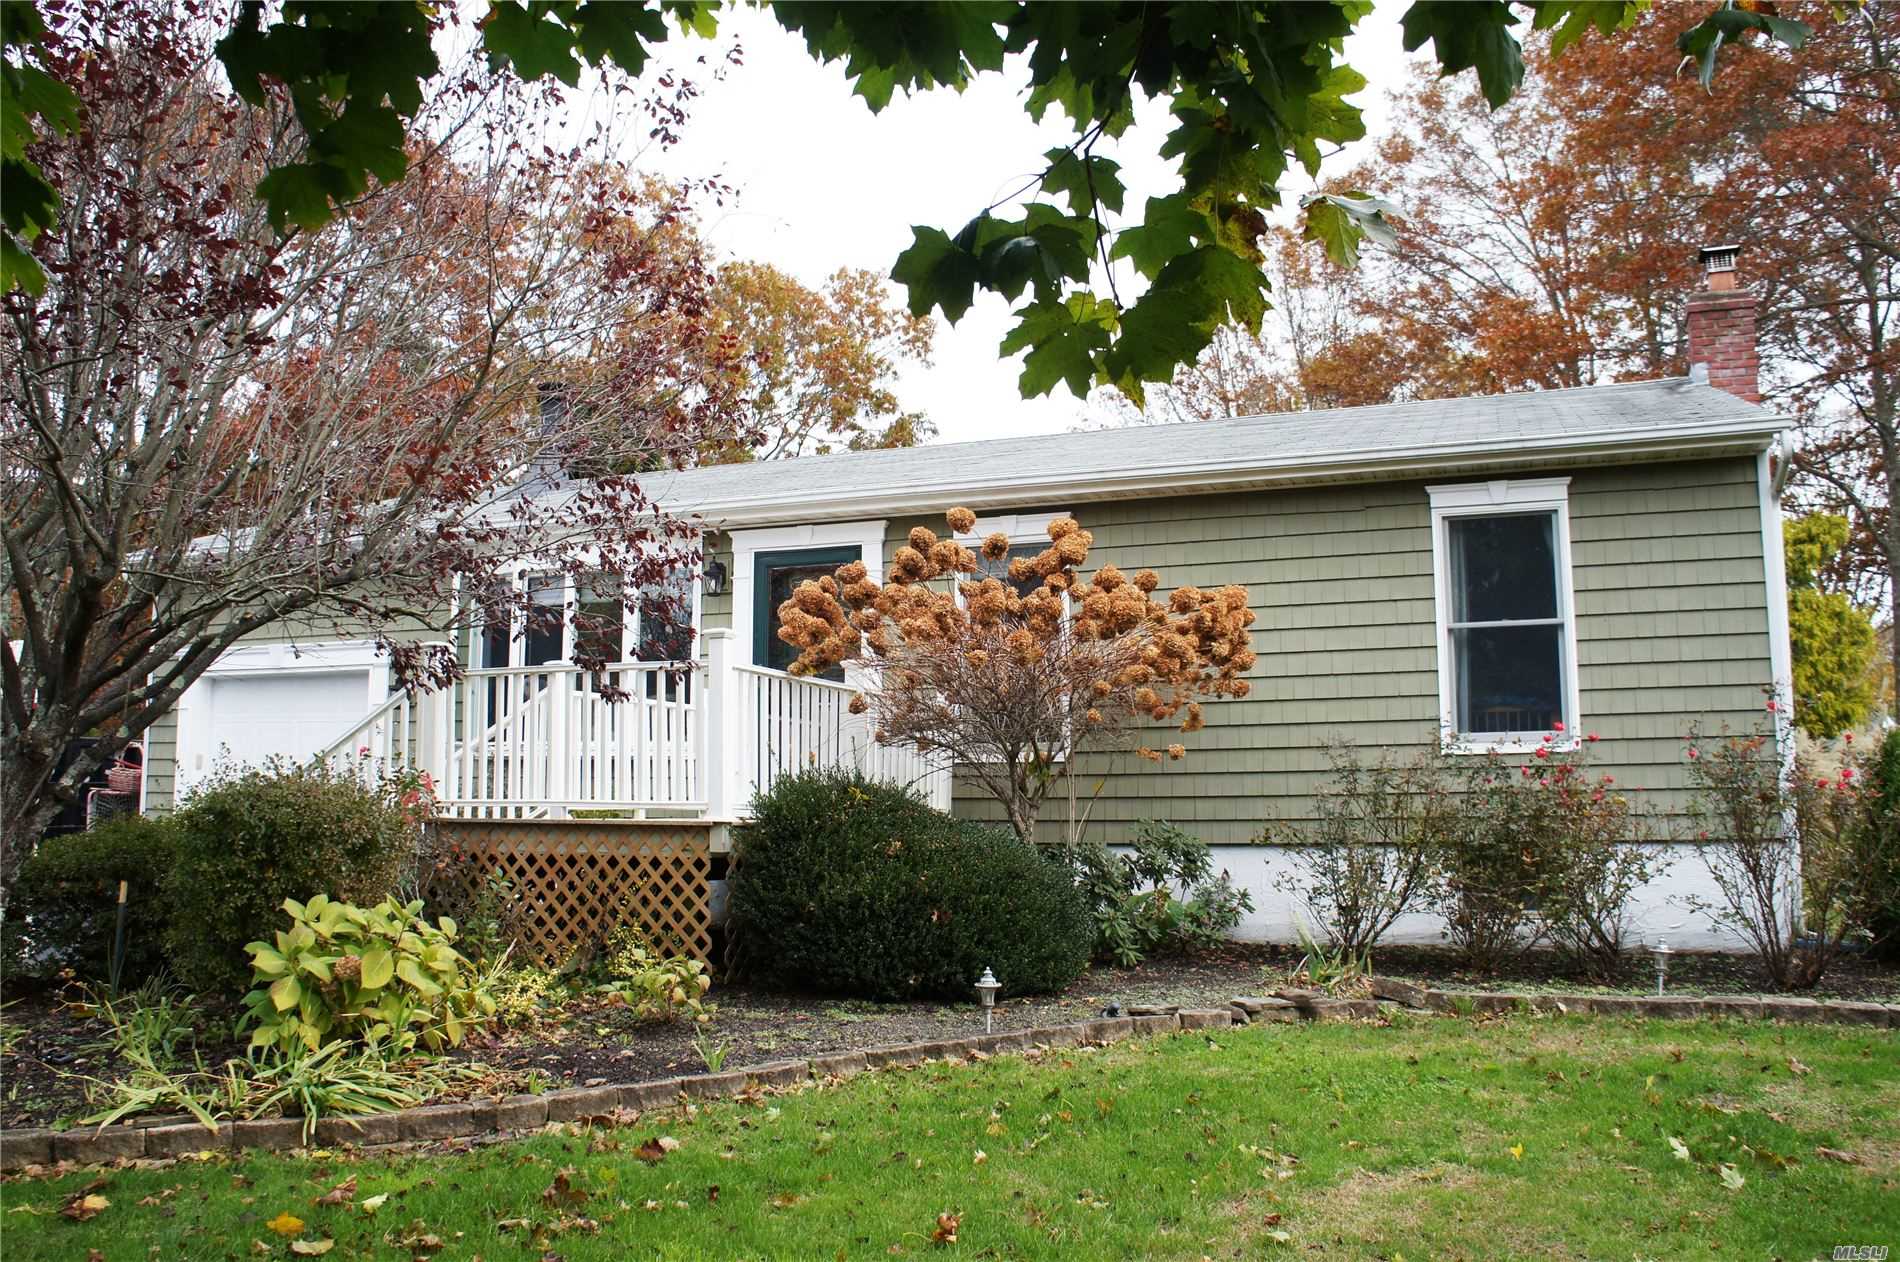 Possible Mother/Daughter In The Desirable Center Moriches Area .Low Taxes.. On Main Floor-Living Rm w/ Wood Floors And Fireplace, Eik w/ Sliders. Master w/ 1/2 Bath. Bedroom #2, 1 Full Bath, Office-Possible 3rd Bedroom. Finished Basement w/ Laundry/Kitchen, 2 Bedrooms, Den, 1 Full Bath. CAC, CVAC, 2 Zone Heat. All New Vinyl Cedar Siding, Anderson Windows. Vinyl Trim On Doors & Windows. New Leaf Filter System Installed On All Gutters. A Must See..